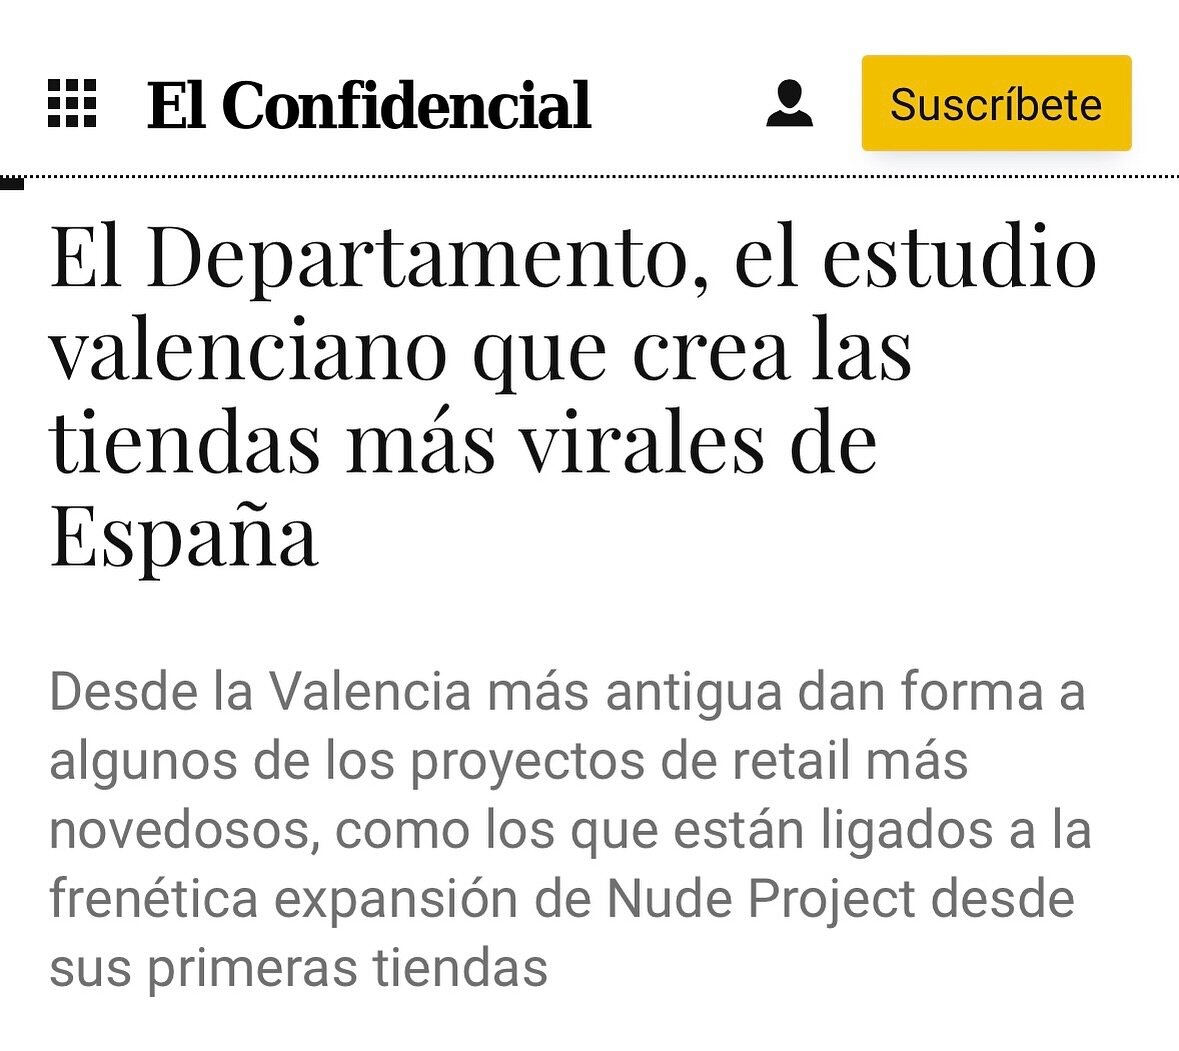 Many thanks to @elconfidencial y @vicentmolins for this. Link in bio.